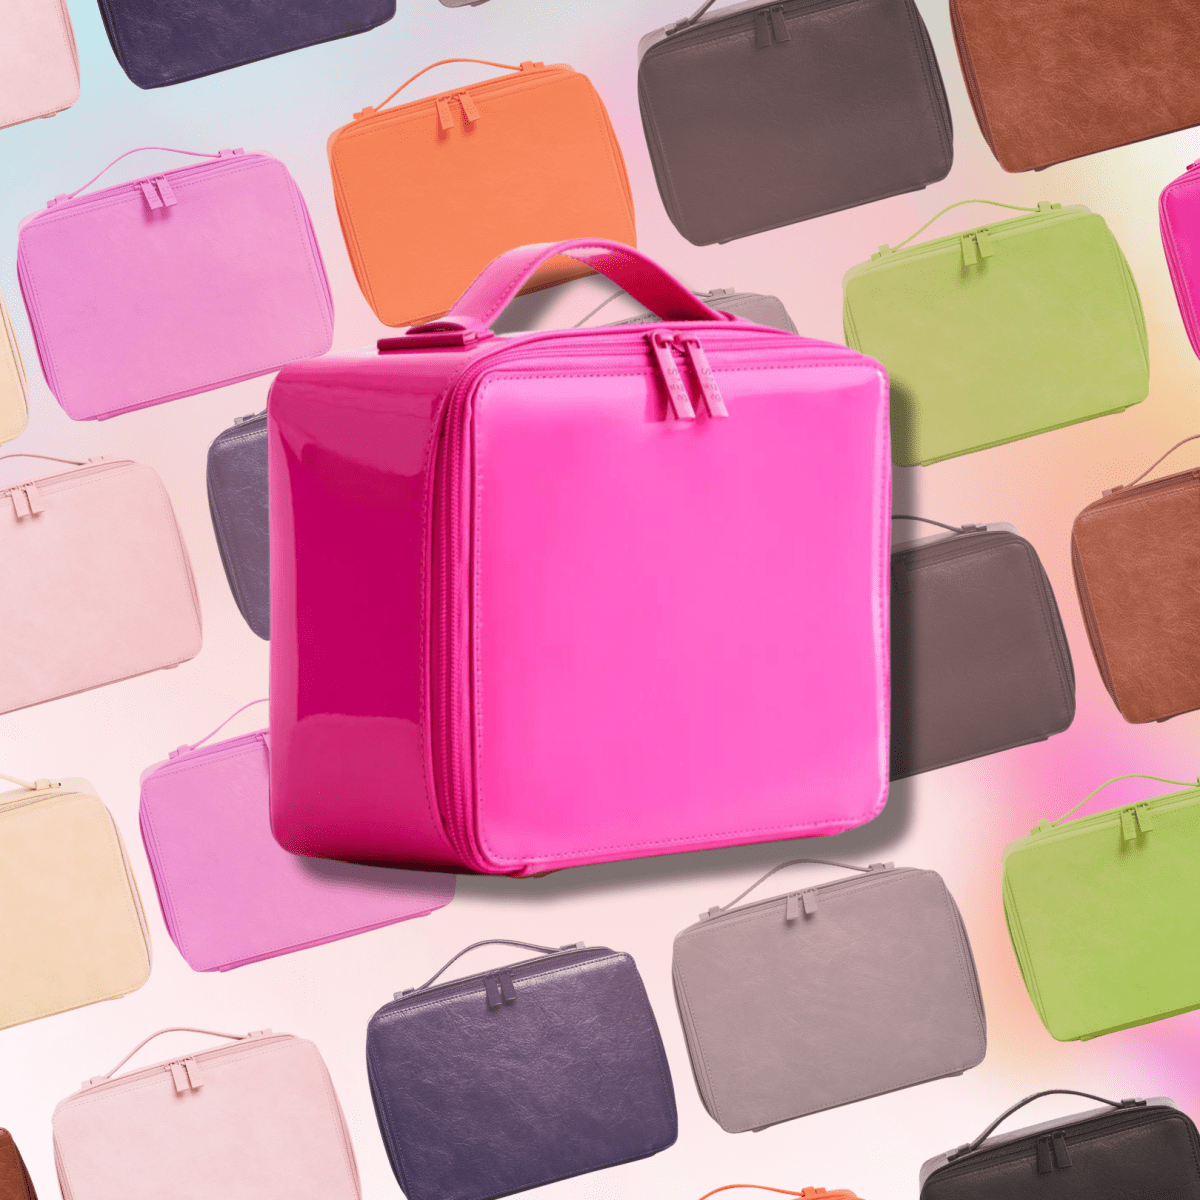 Best Travel Makeup Bags, Organizers, Cases - Fashionista